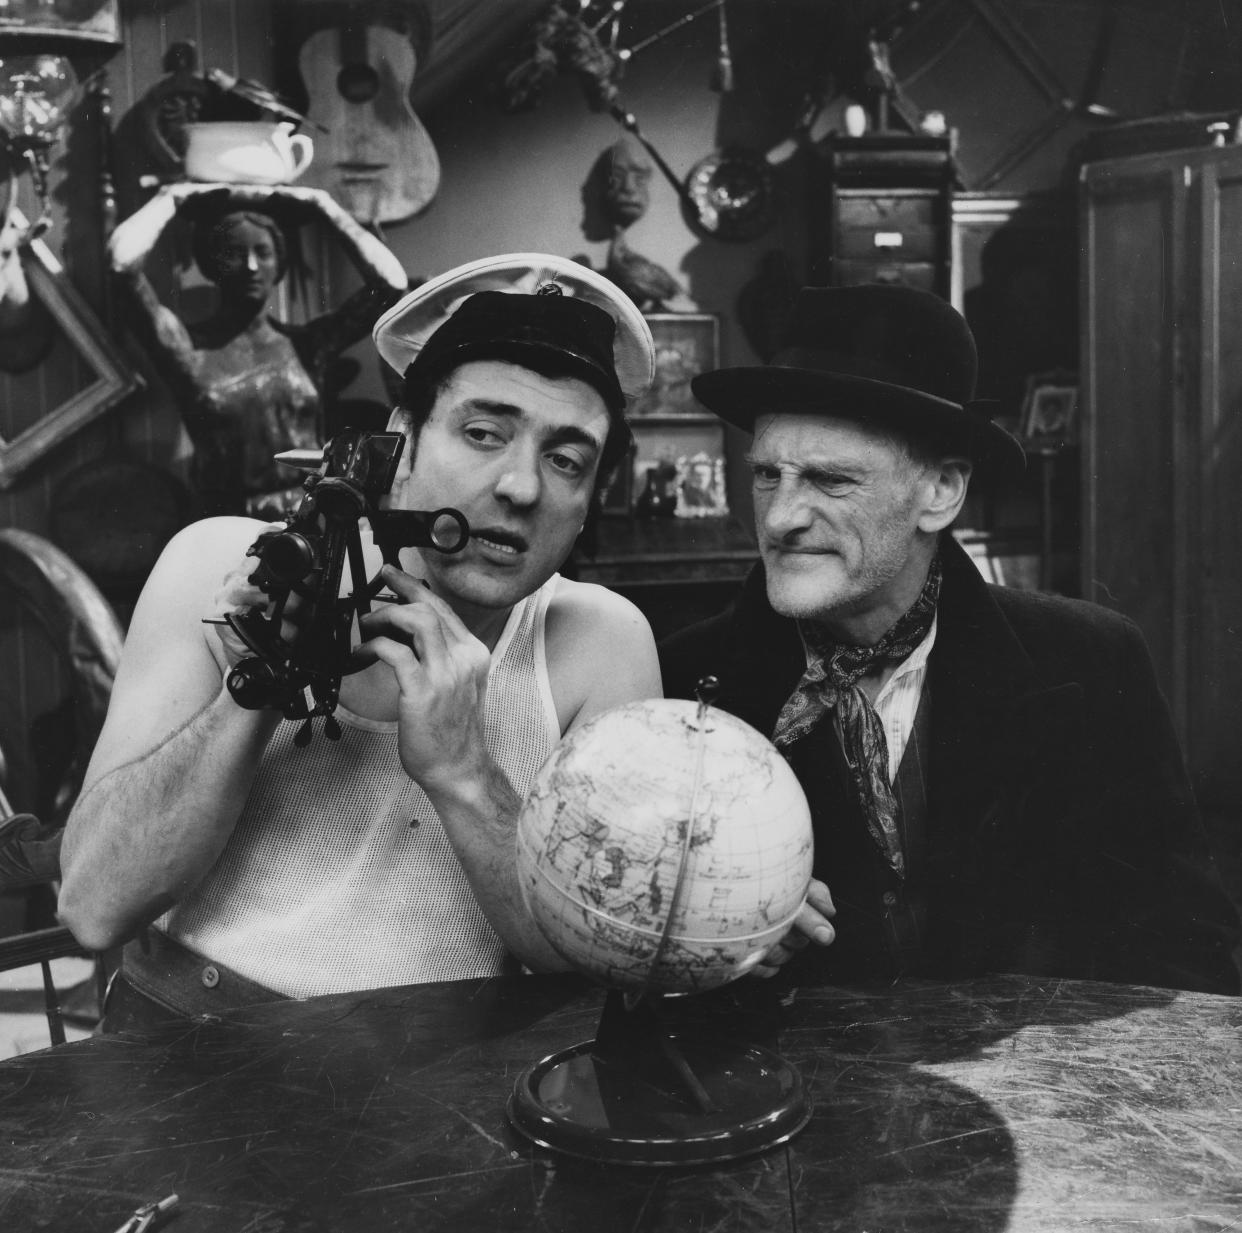 Actors Wilfrid Brambell (right) and Harry H Corbett sitting in front of a globe in a scene from episode 'Homes Fit for Heroes' of the television sitcom 'Steptoe and Son', December 12th 1963. (Photo by Don Smith/Radio Times/Getty Images)